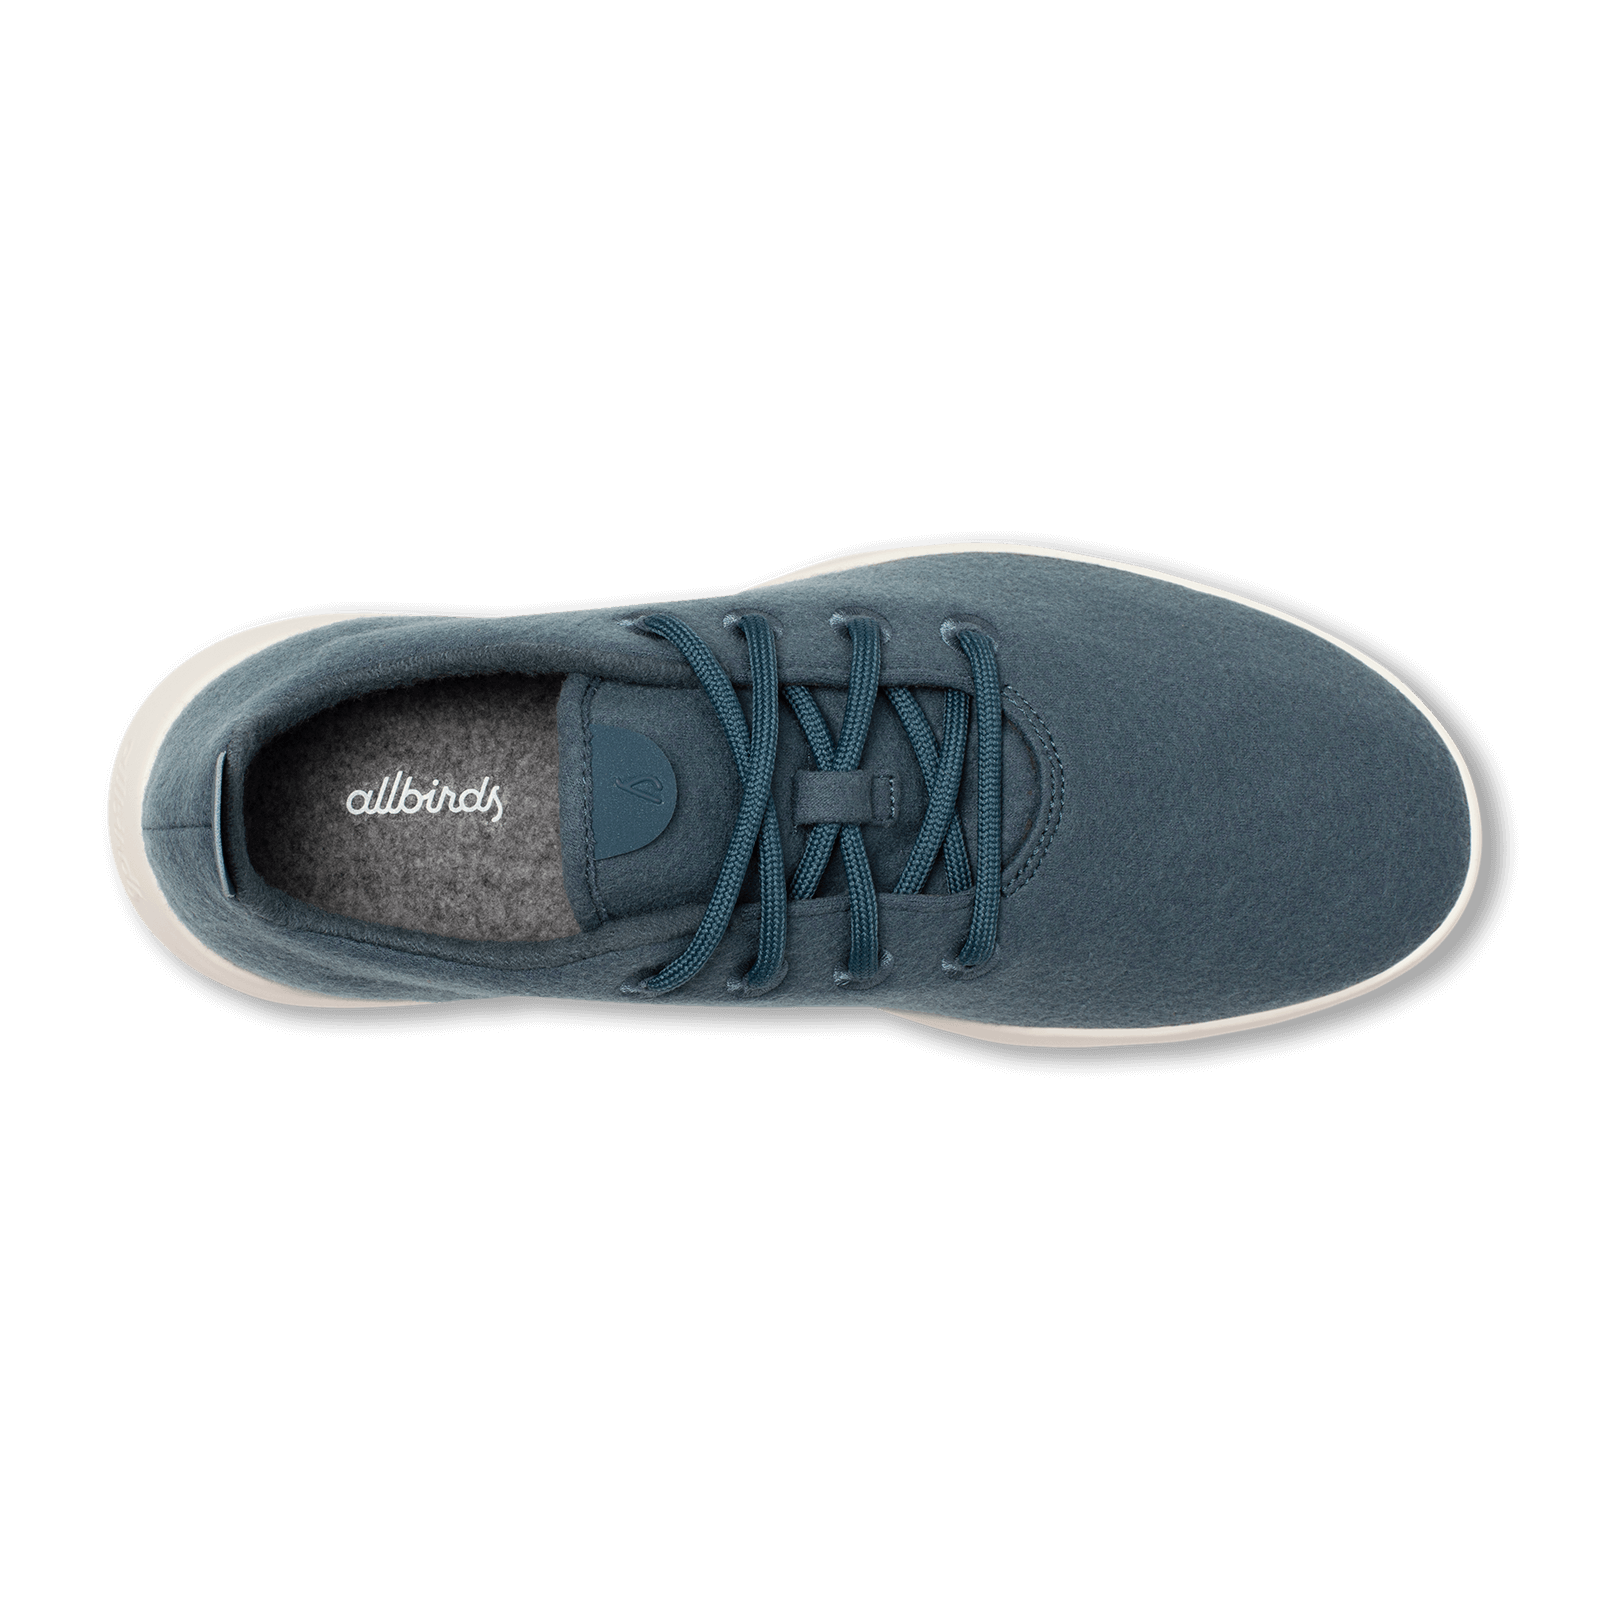 Men's Wool Runners - Calm Teal (Natural White Sole)